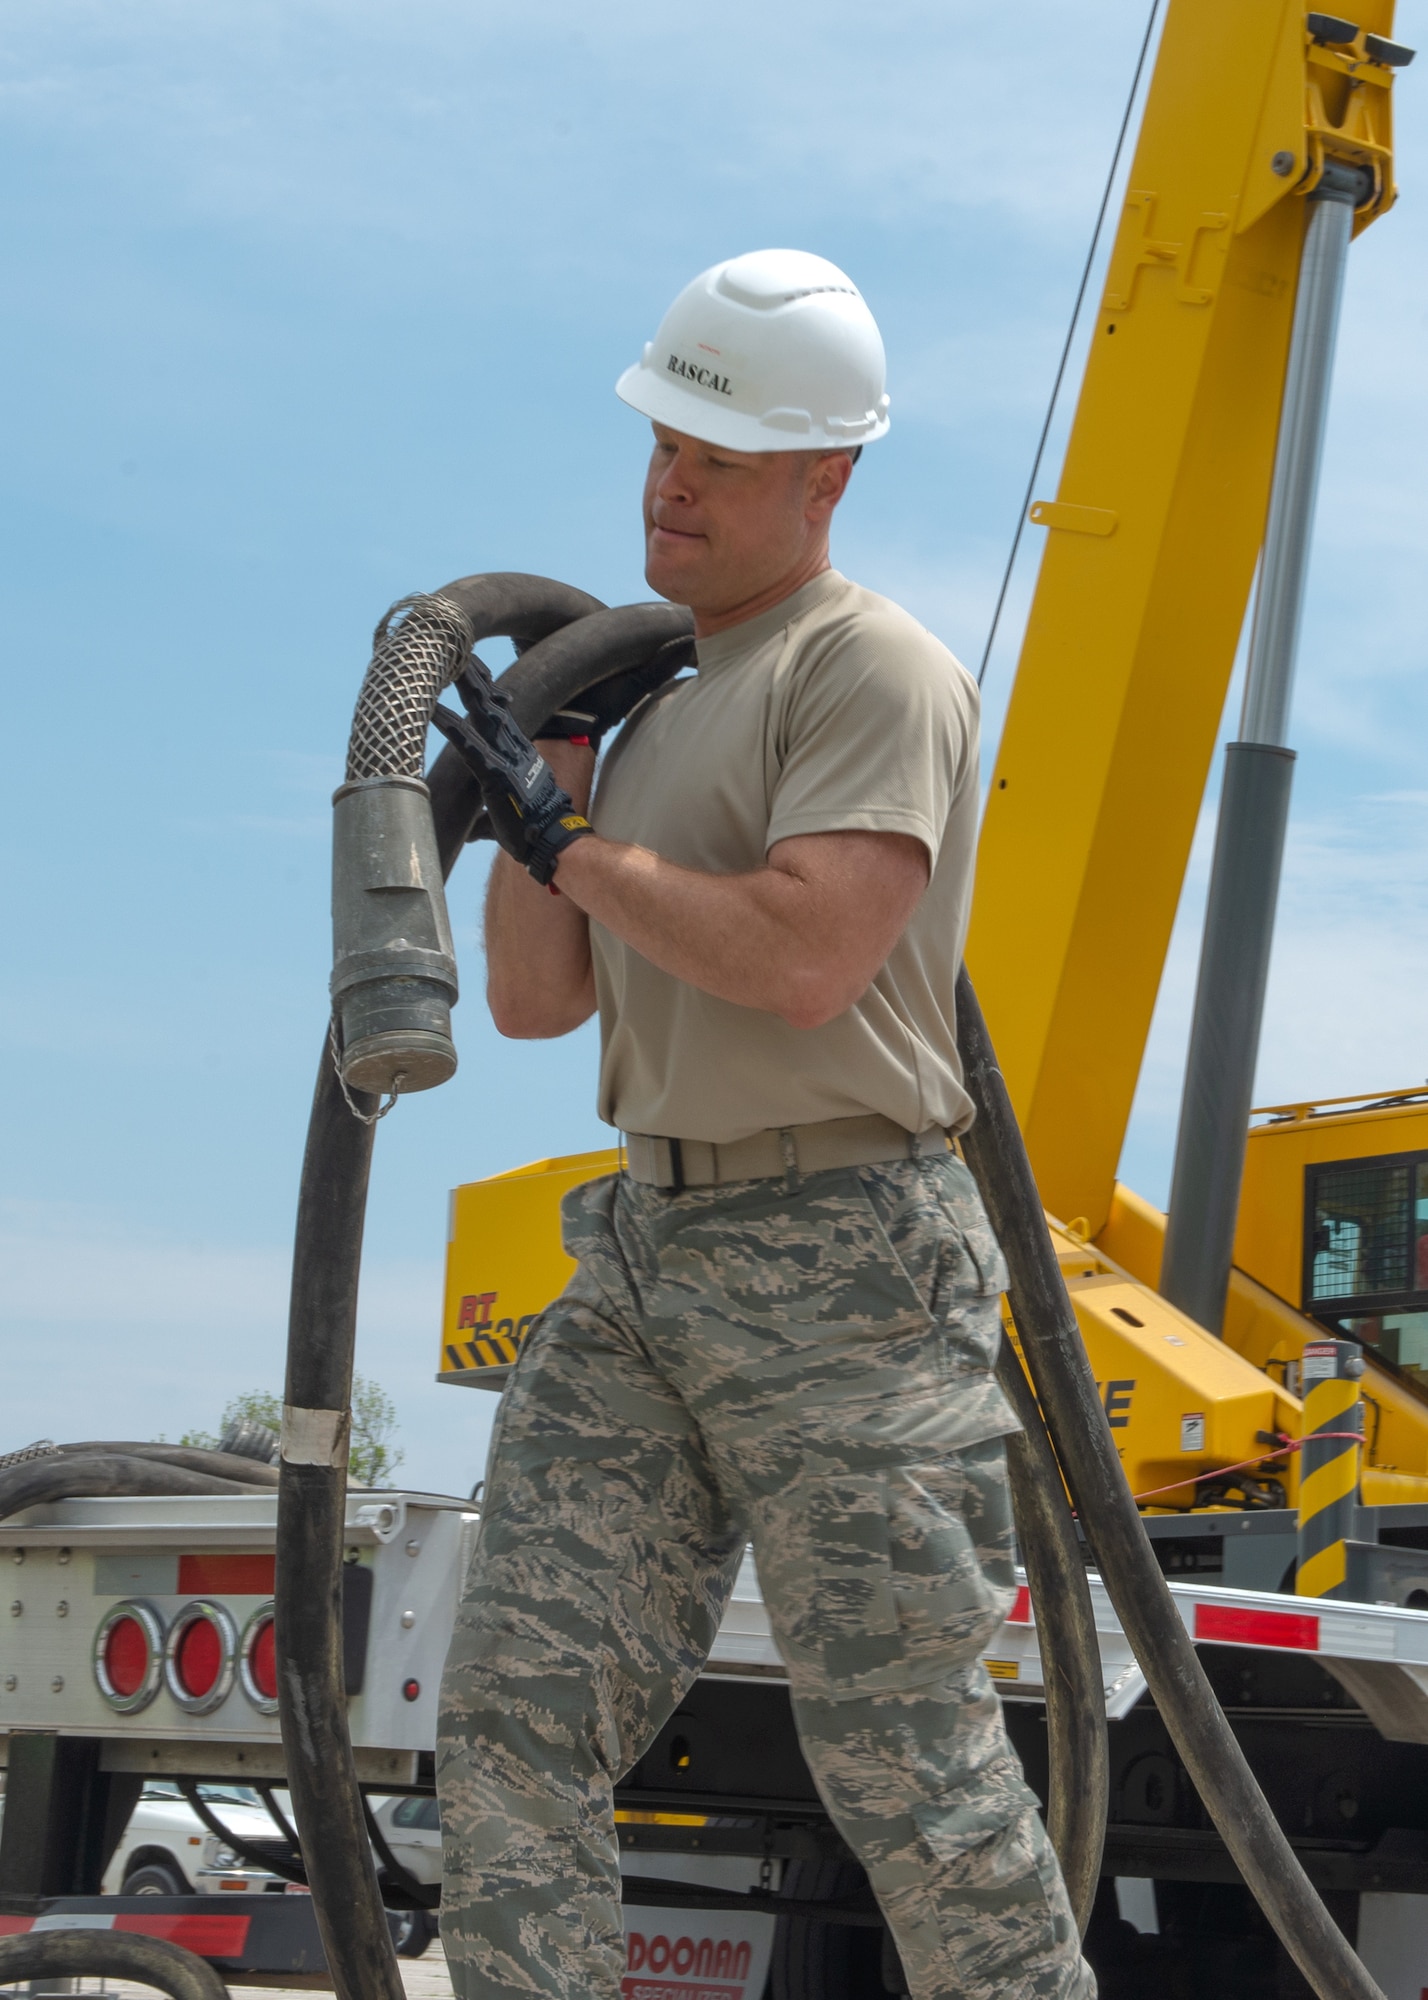 Master Sgt. Mason Lucas, a test measurement and diagnostic equipment quality manager assigned to the 4th Component Maintenance Squadron at Seymour Johnson Air Force Base, North Carolina, carries power cables out of a integrated unit (INU) tactical shelter May 6, 2019, at Offutt Air Force Base, Nebraska. The INU is the main scheduling unit for the Rapid Assistance Support for Calibration unit brought in to reestablish the base’s capability to calibrate equipment, which was lost in the flood. (U.S. Air Force photo by L. Cunningham)